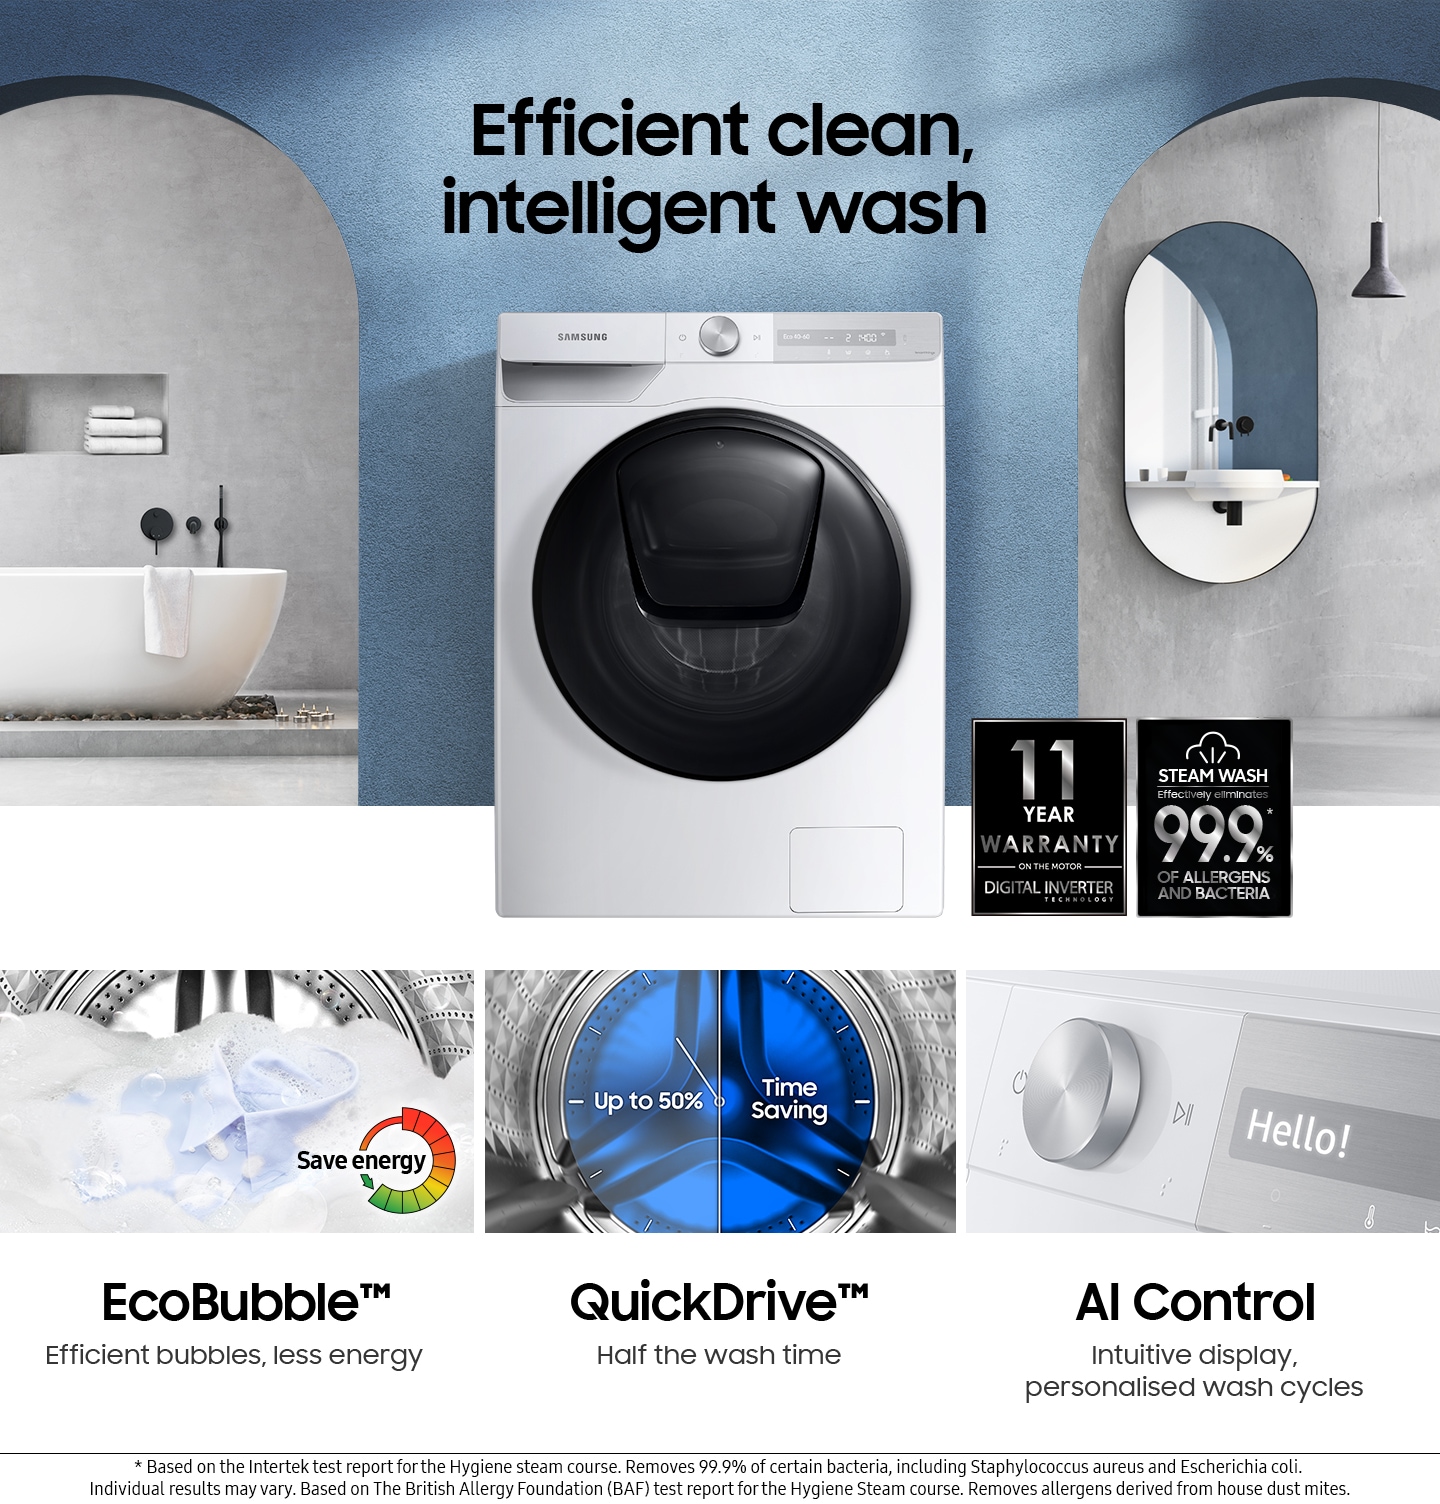 WD7500T is germ-free, and 10-year warranty with EcoBubble, QuickDrive, and AI Control functions.